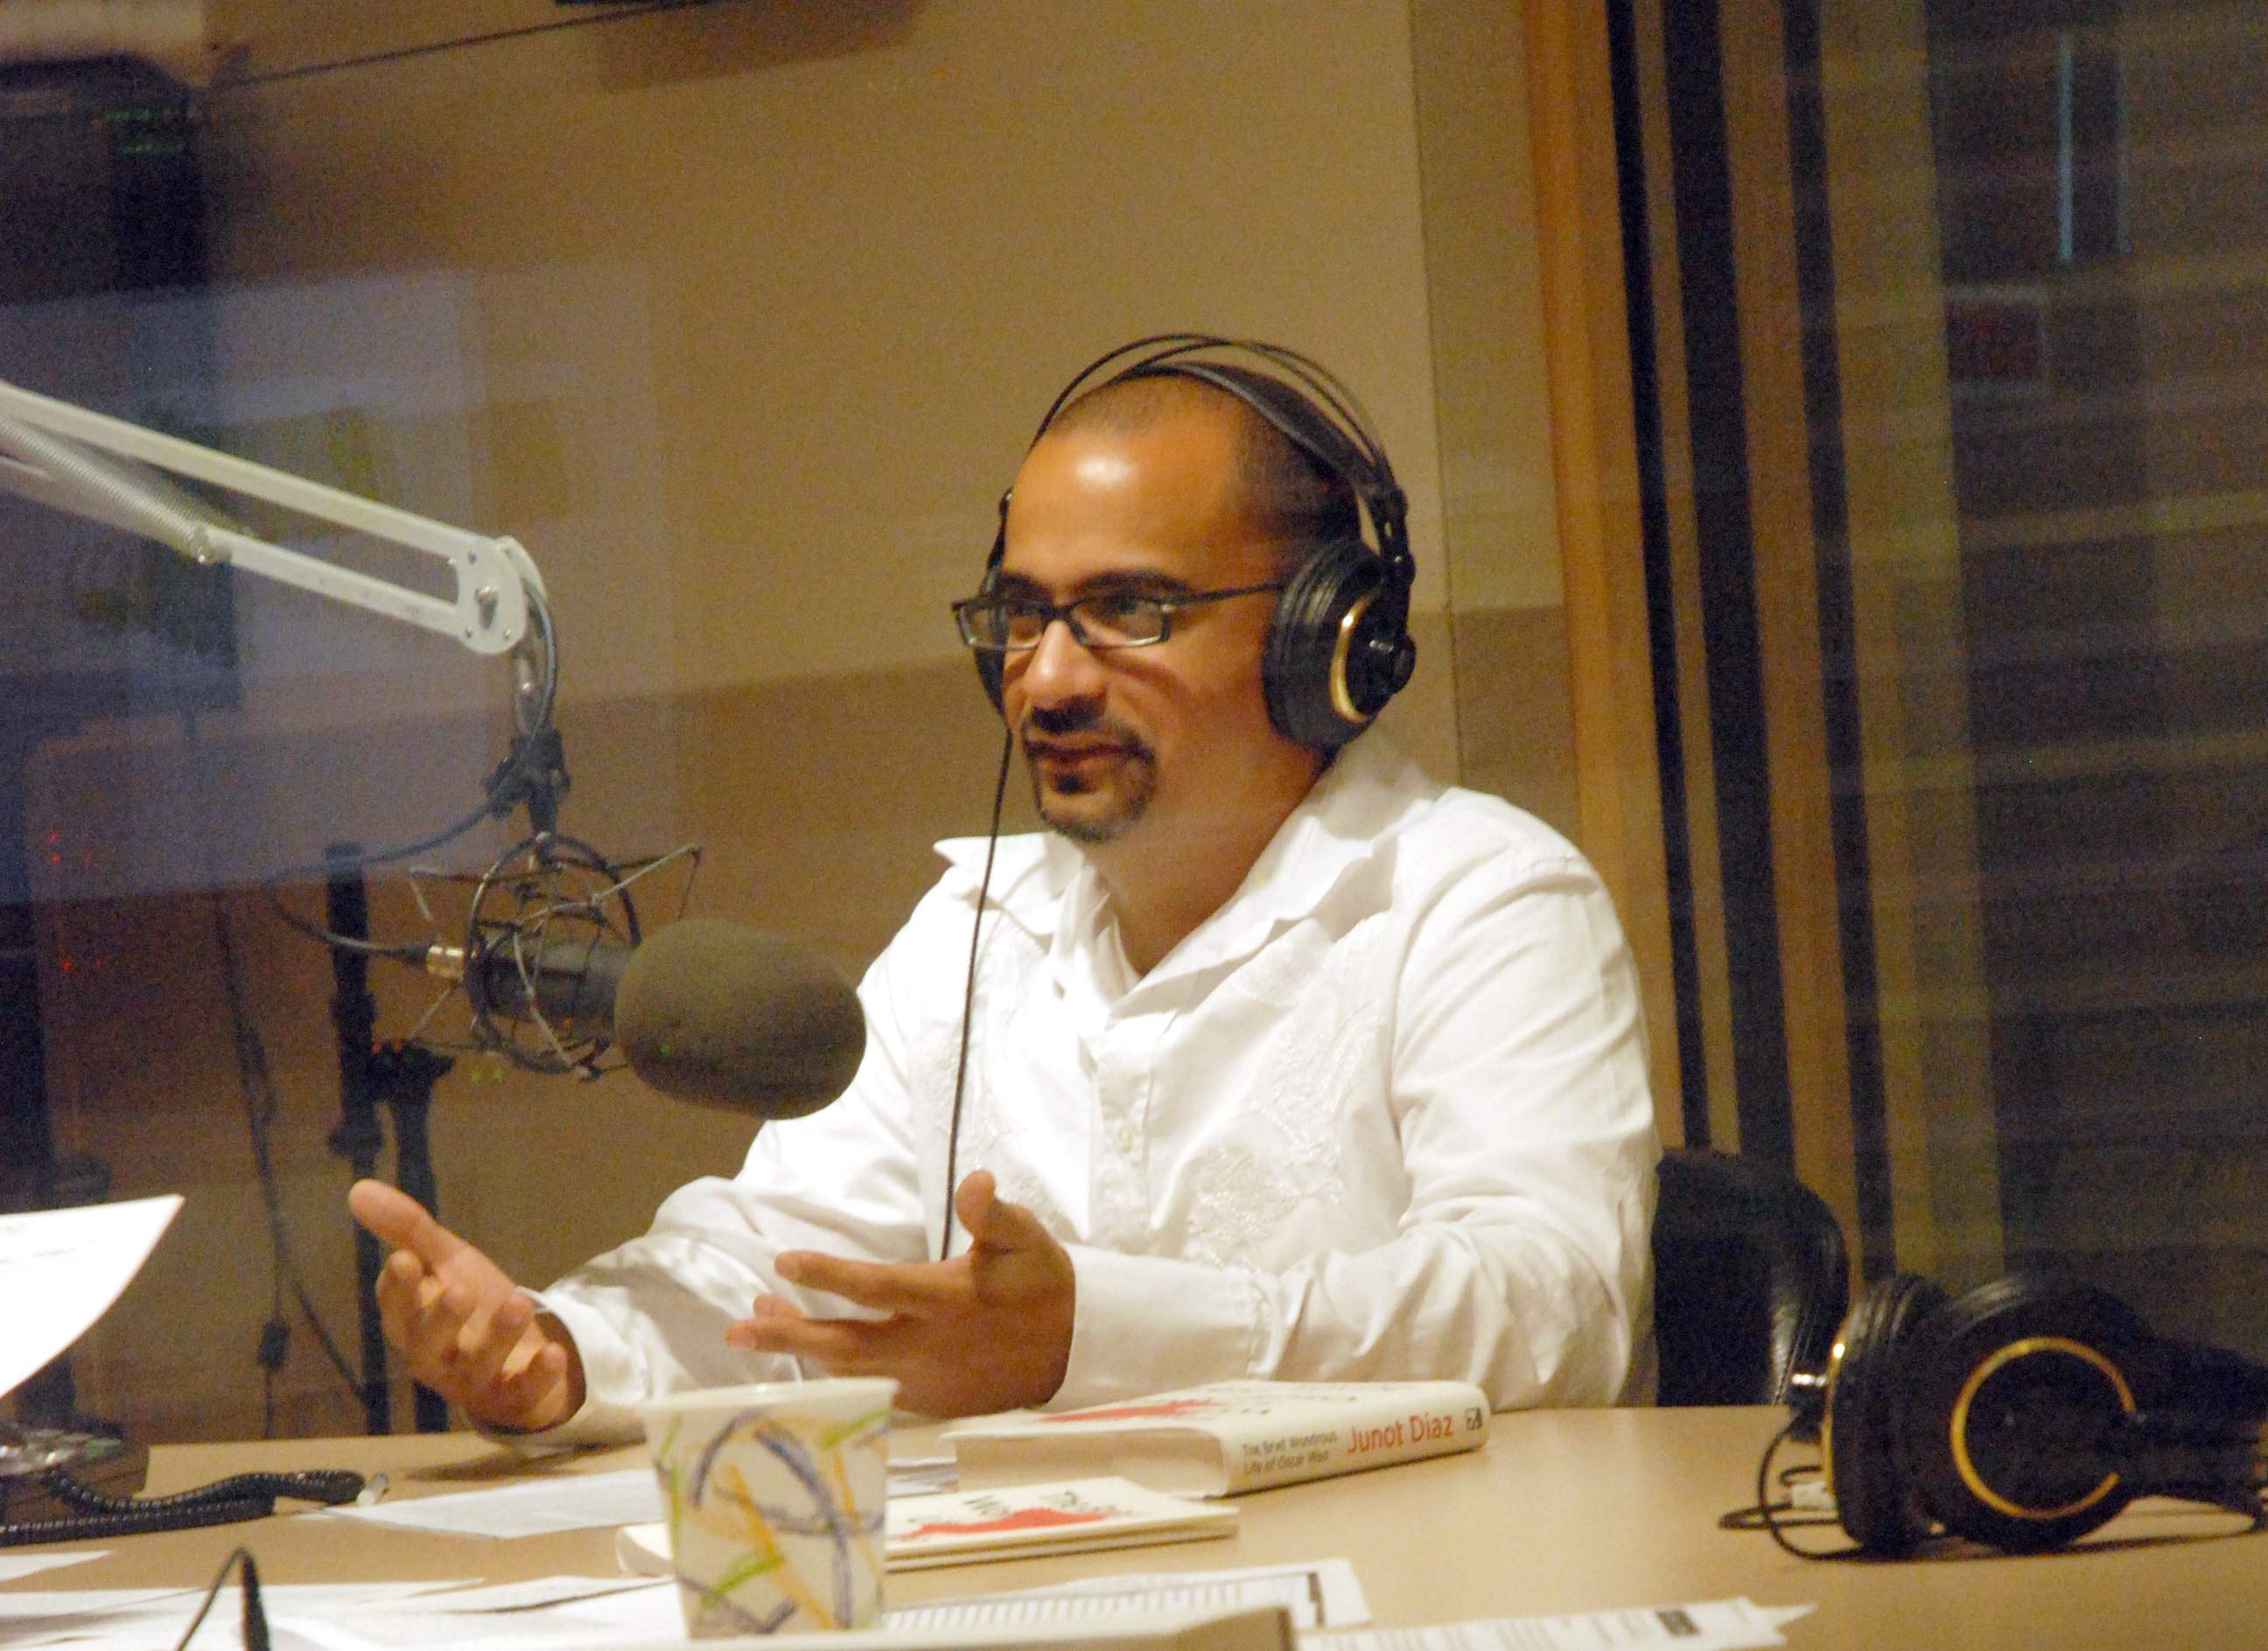 This Is How You Listen: Reading Critically Junot Díaz’s Audiobook